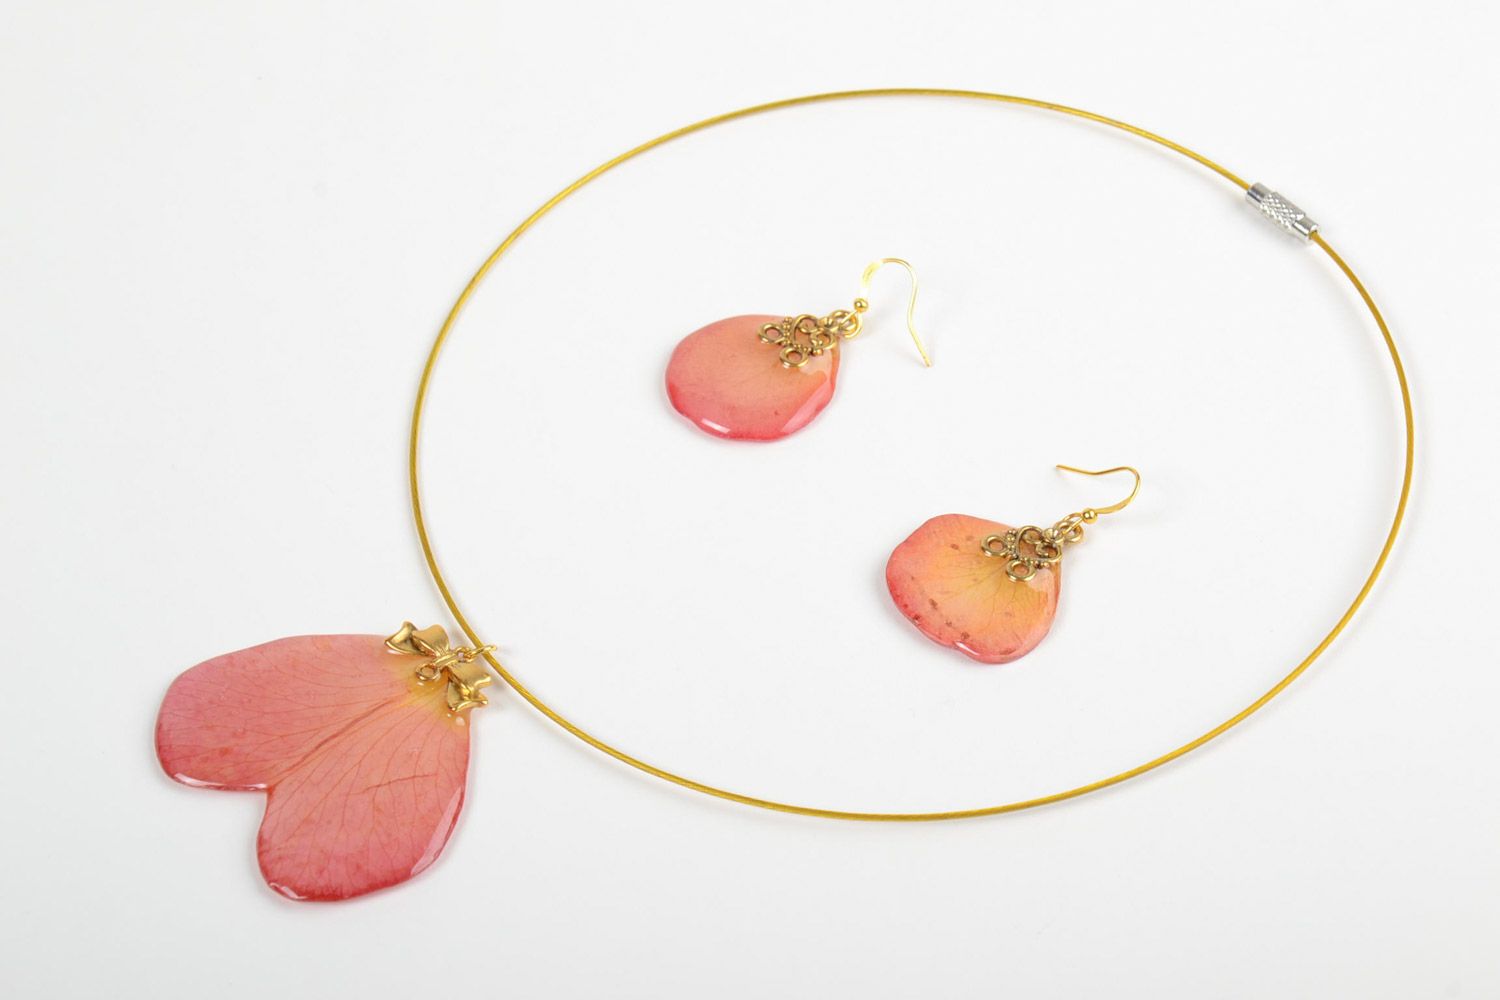 Handmade epoxy resin jewelry set 2 items botanical pendant and earrings of pink color photo 3